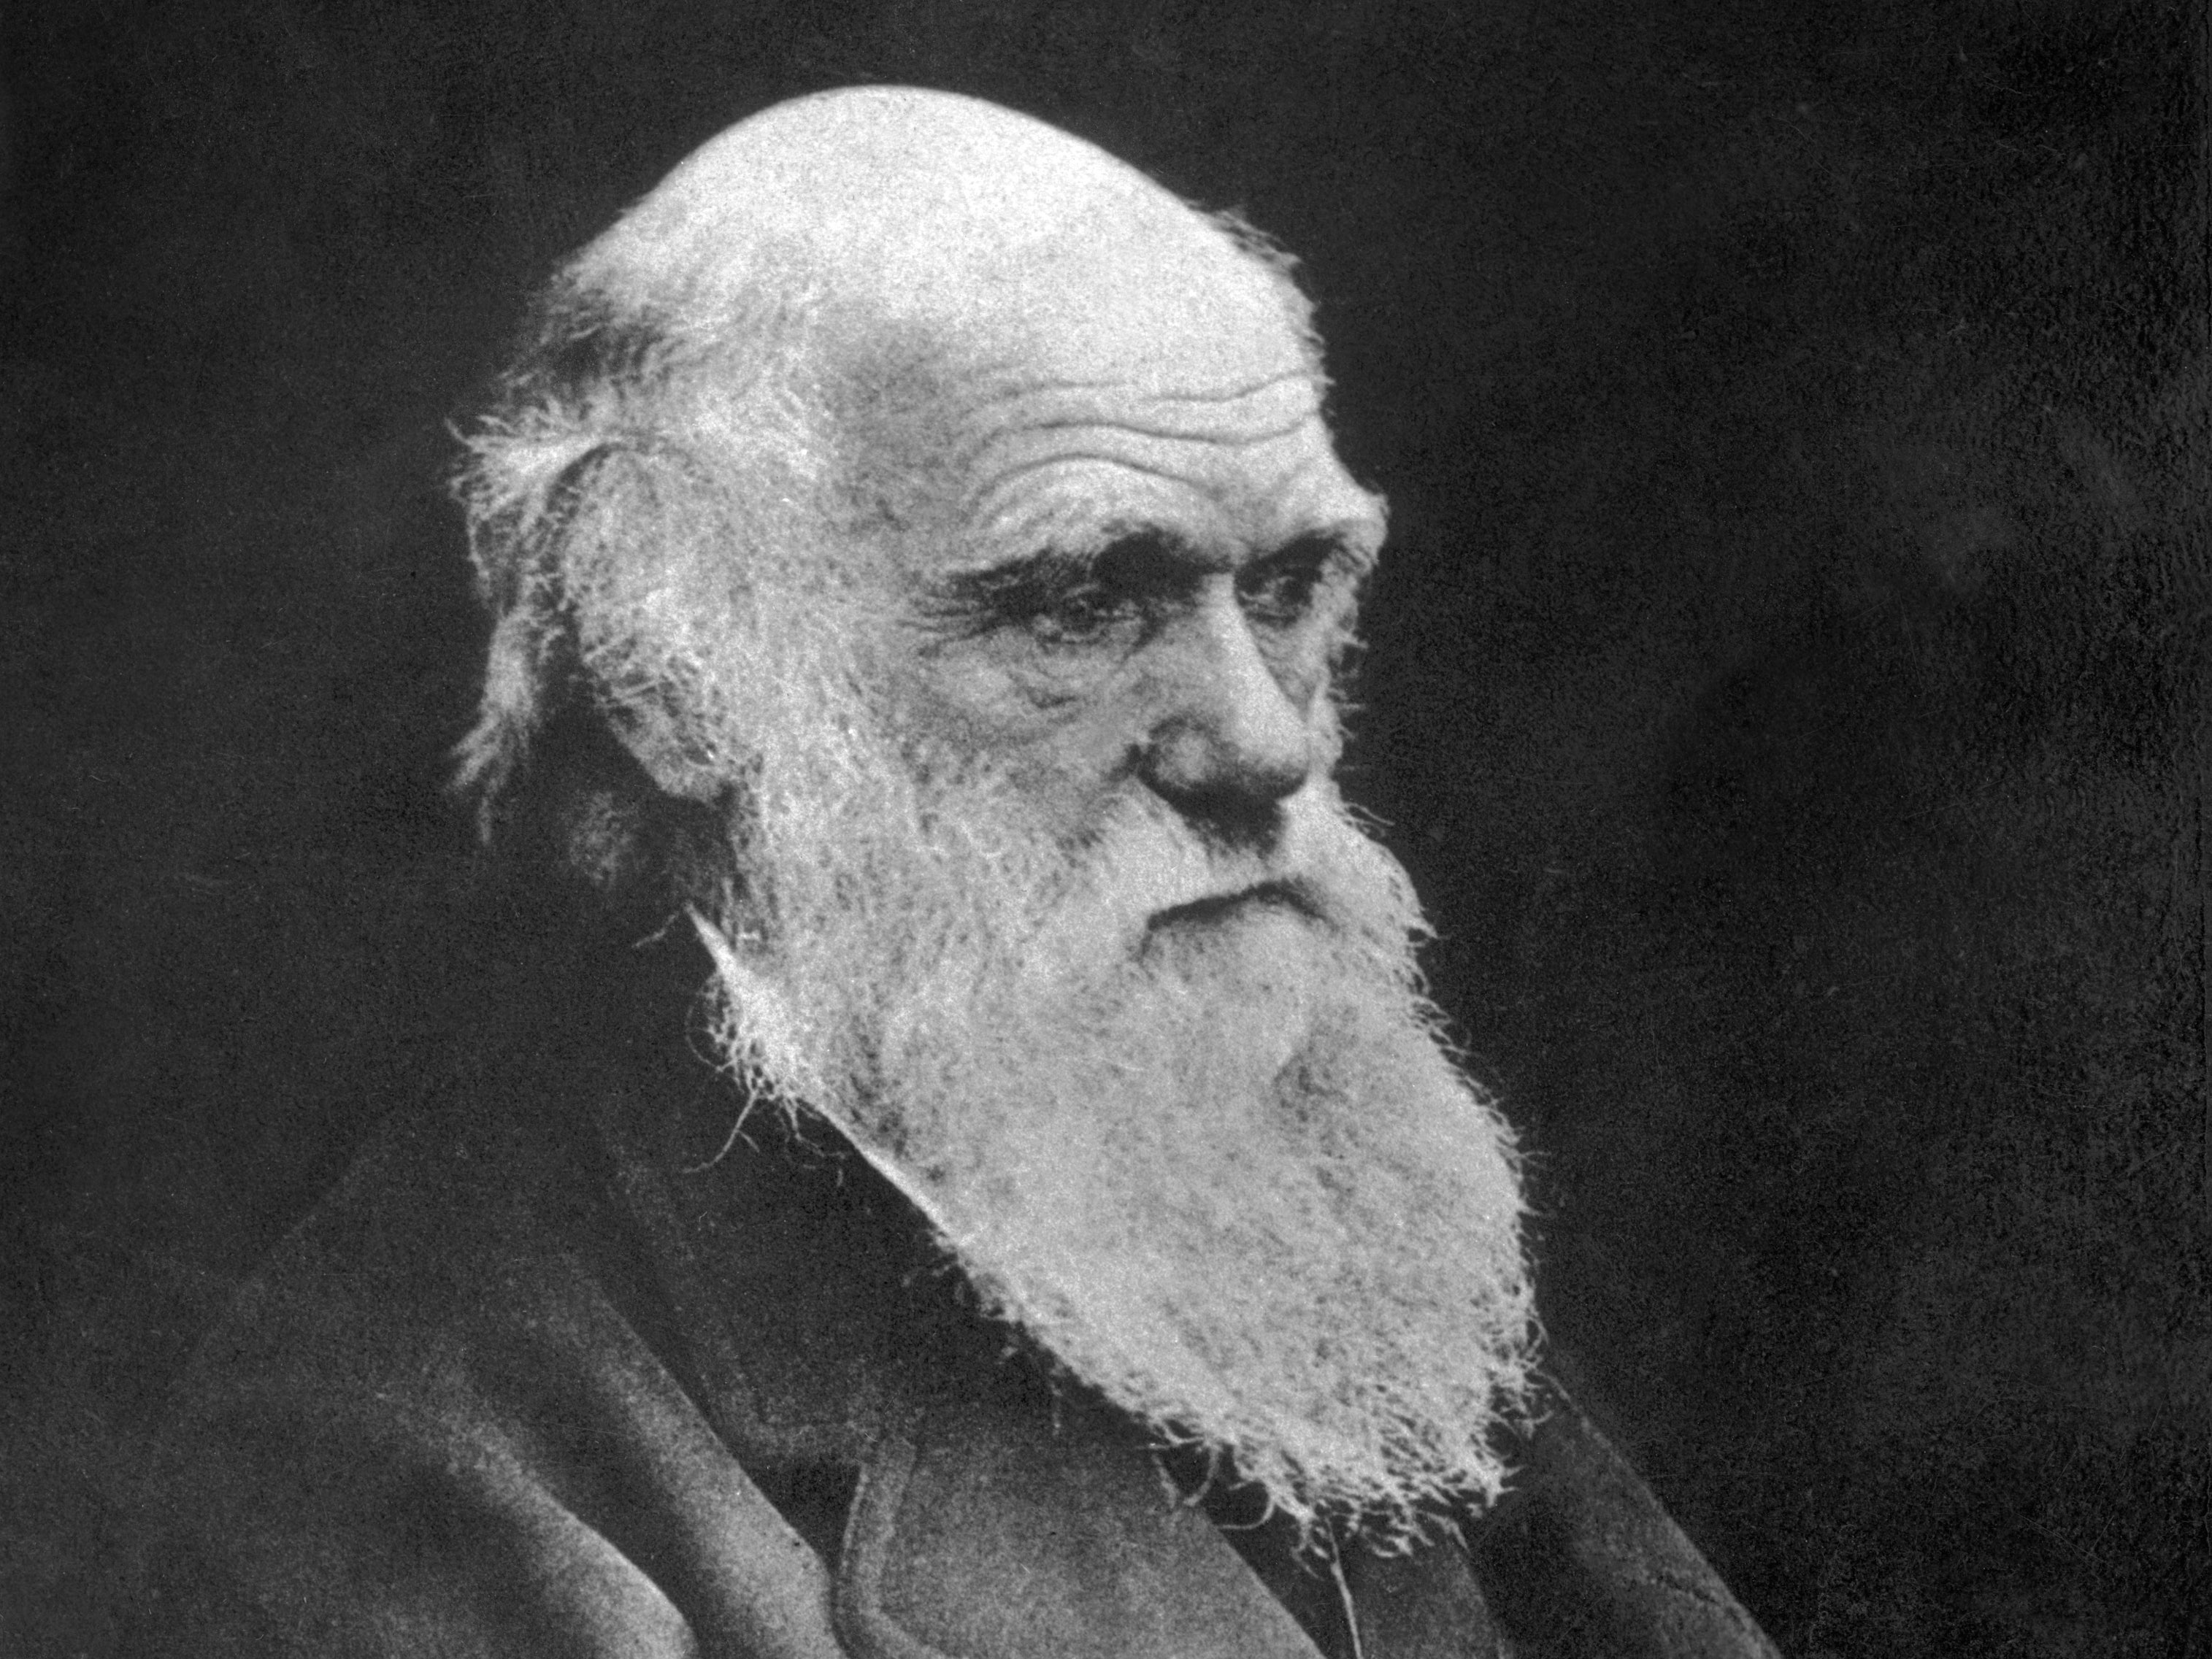 Darwin’s importance simply cannot be overstated